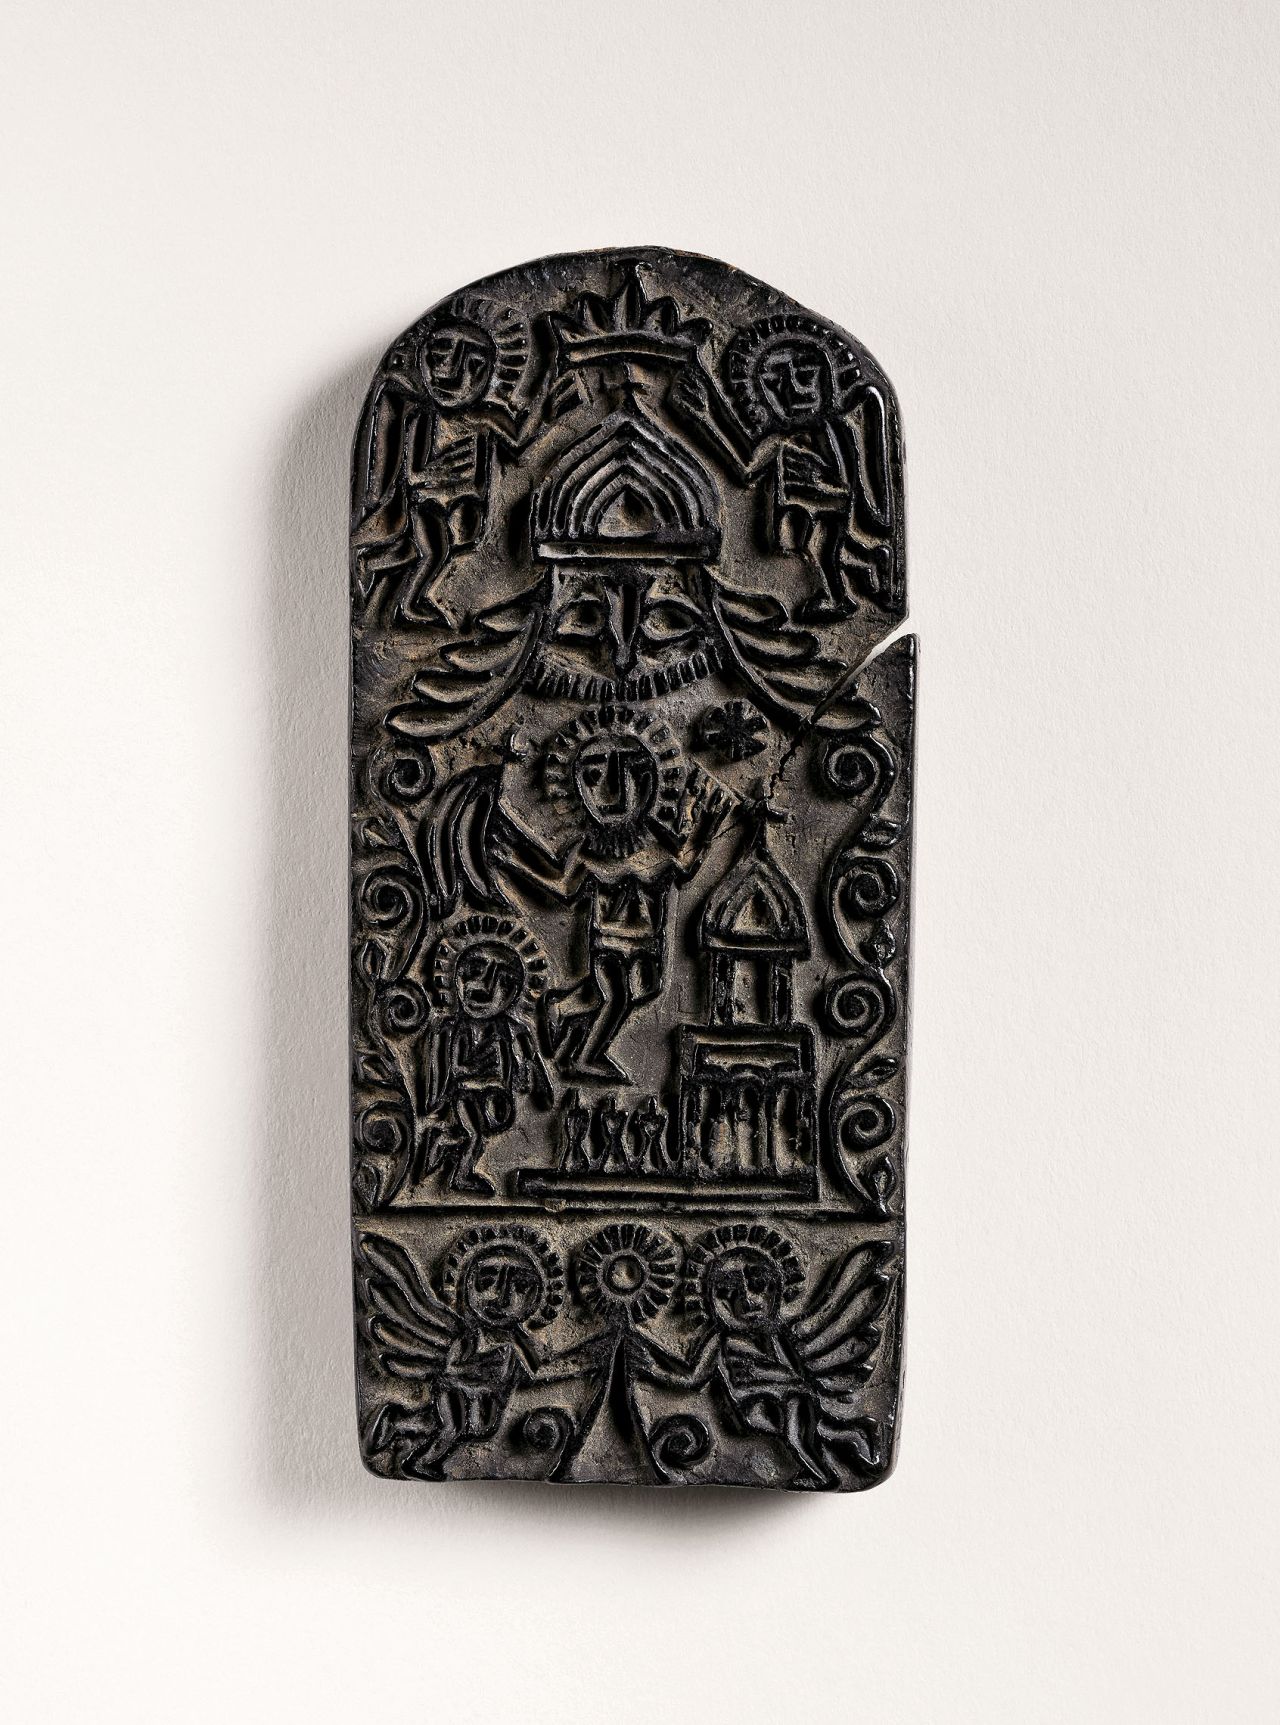 This 17th-century tattoo stamp was used to make an imprint of a tattoo on the skin, which was then needled. It was owned by the Razzouk family of Jerusalem, originally of Coptic descent, who have been tattooing pilgrims with Christian iconography for centuries; they continue to do so today. This stamp depicts the resurrection of Christ.